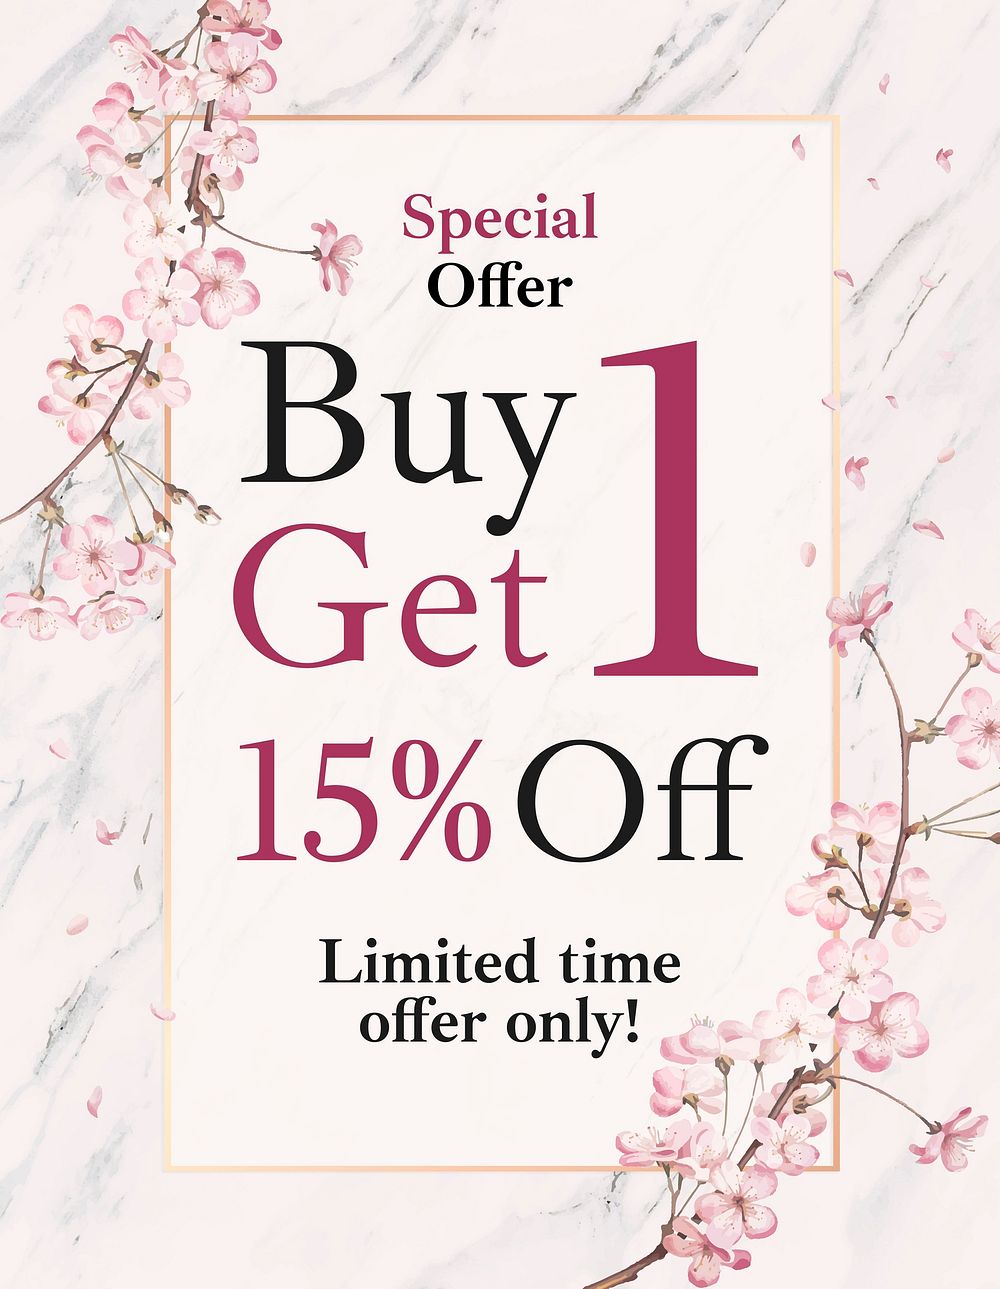 Special offer flyer template, cherry blossom, editable text vector